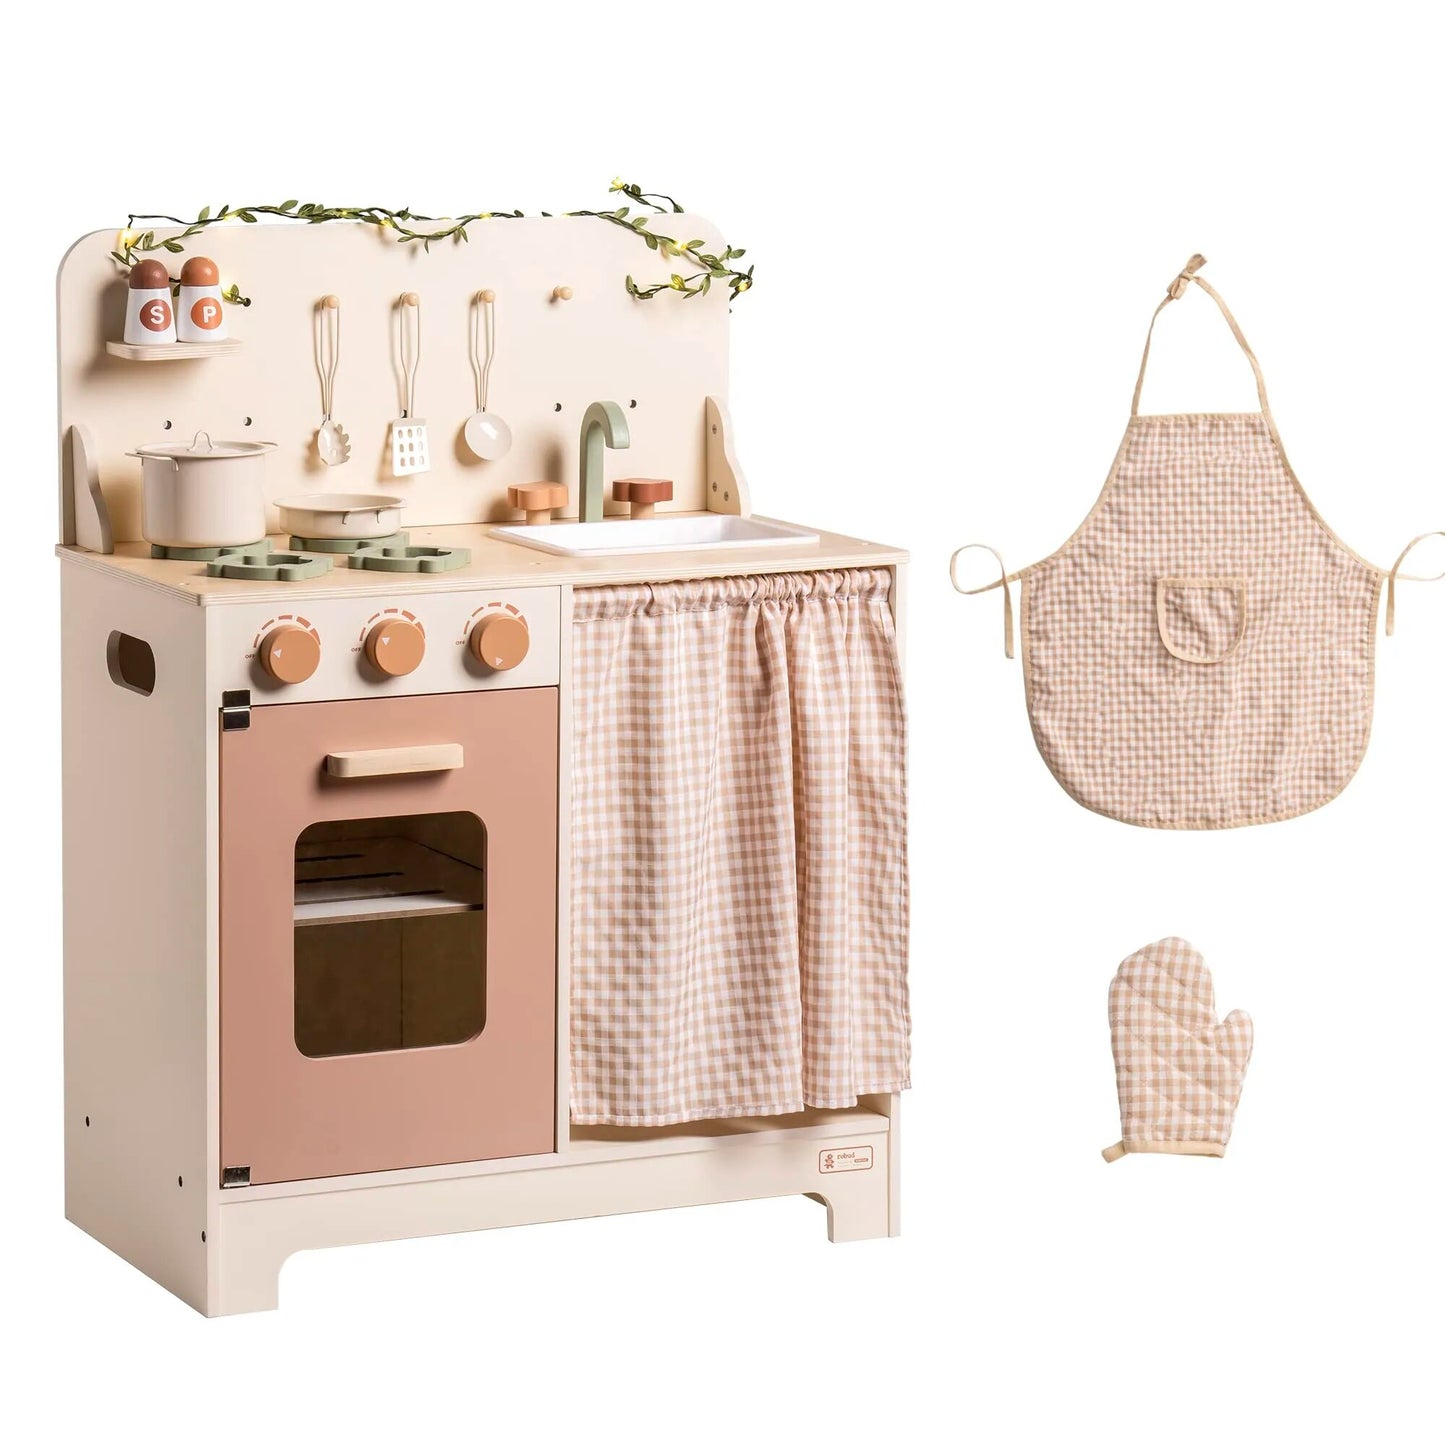 Kids Play Kitchen Set - Rustic Wooden Pretend Play Kitchen with Leaf Light String, Apron, and Groves, for Toddlers 3+  Wooden Play Kitchen